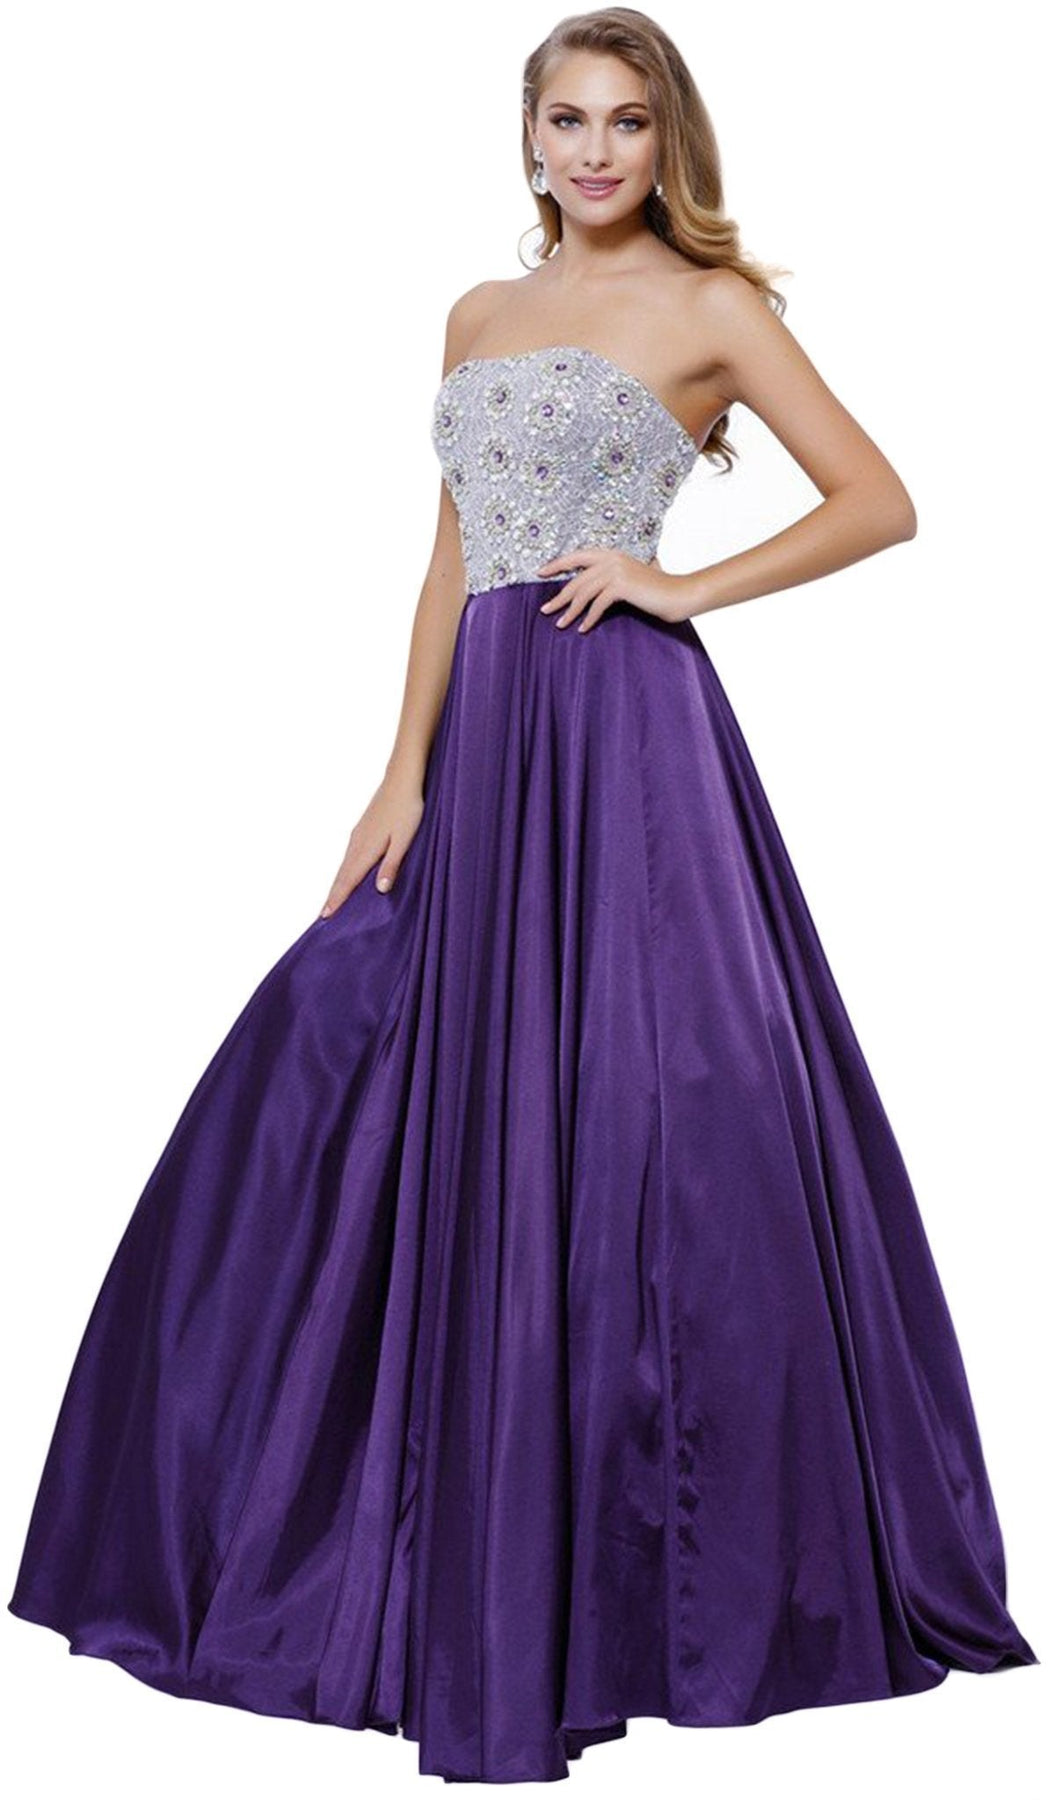 Nox Anabel - 8186 Metallic Embellished Strapless Long Evening Gown Special Occasion Dress XS / Plum